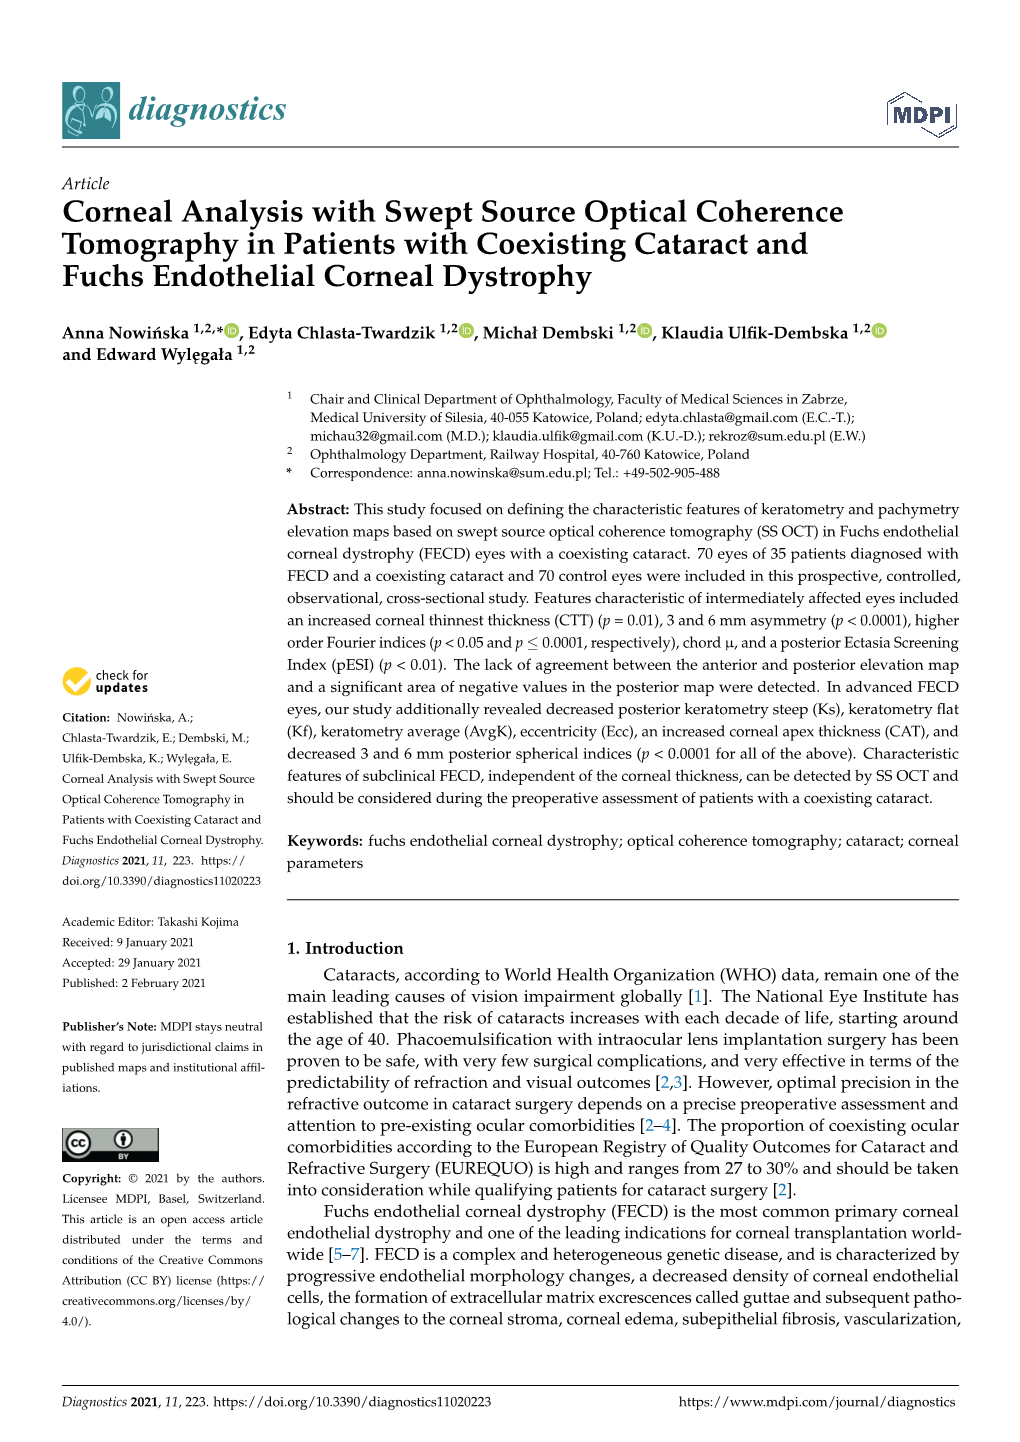 Corneal Analysis with Swept Source Optical Coherence Tomography in Patients with Coexisting Cataract and Fuchs Endothelial Corneal Dystrophy